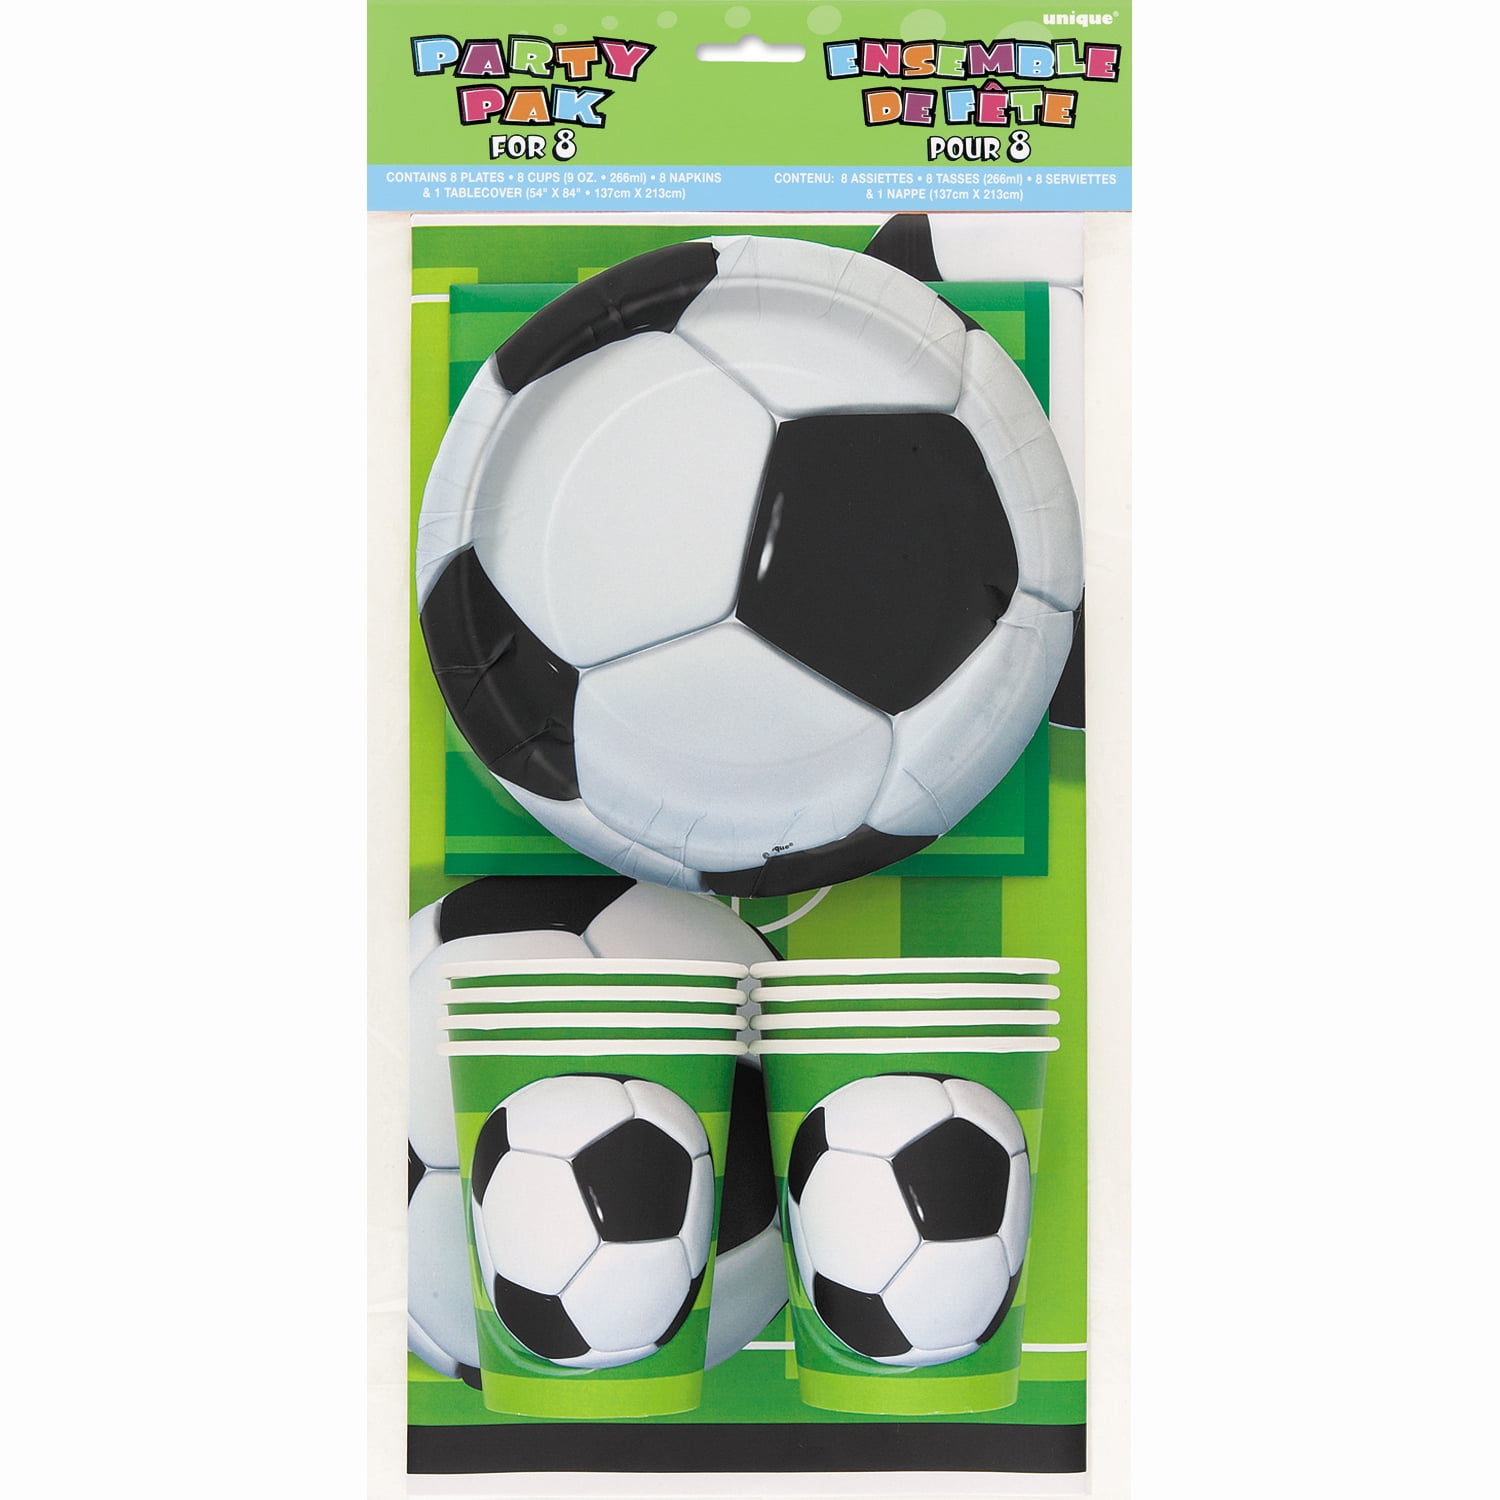 Mickey Mouse Soccer Birthday Party Invitations with photo 8 pack 